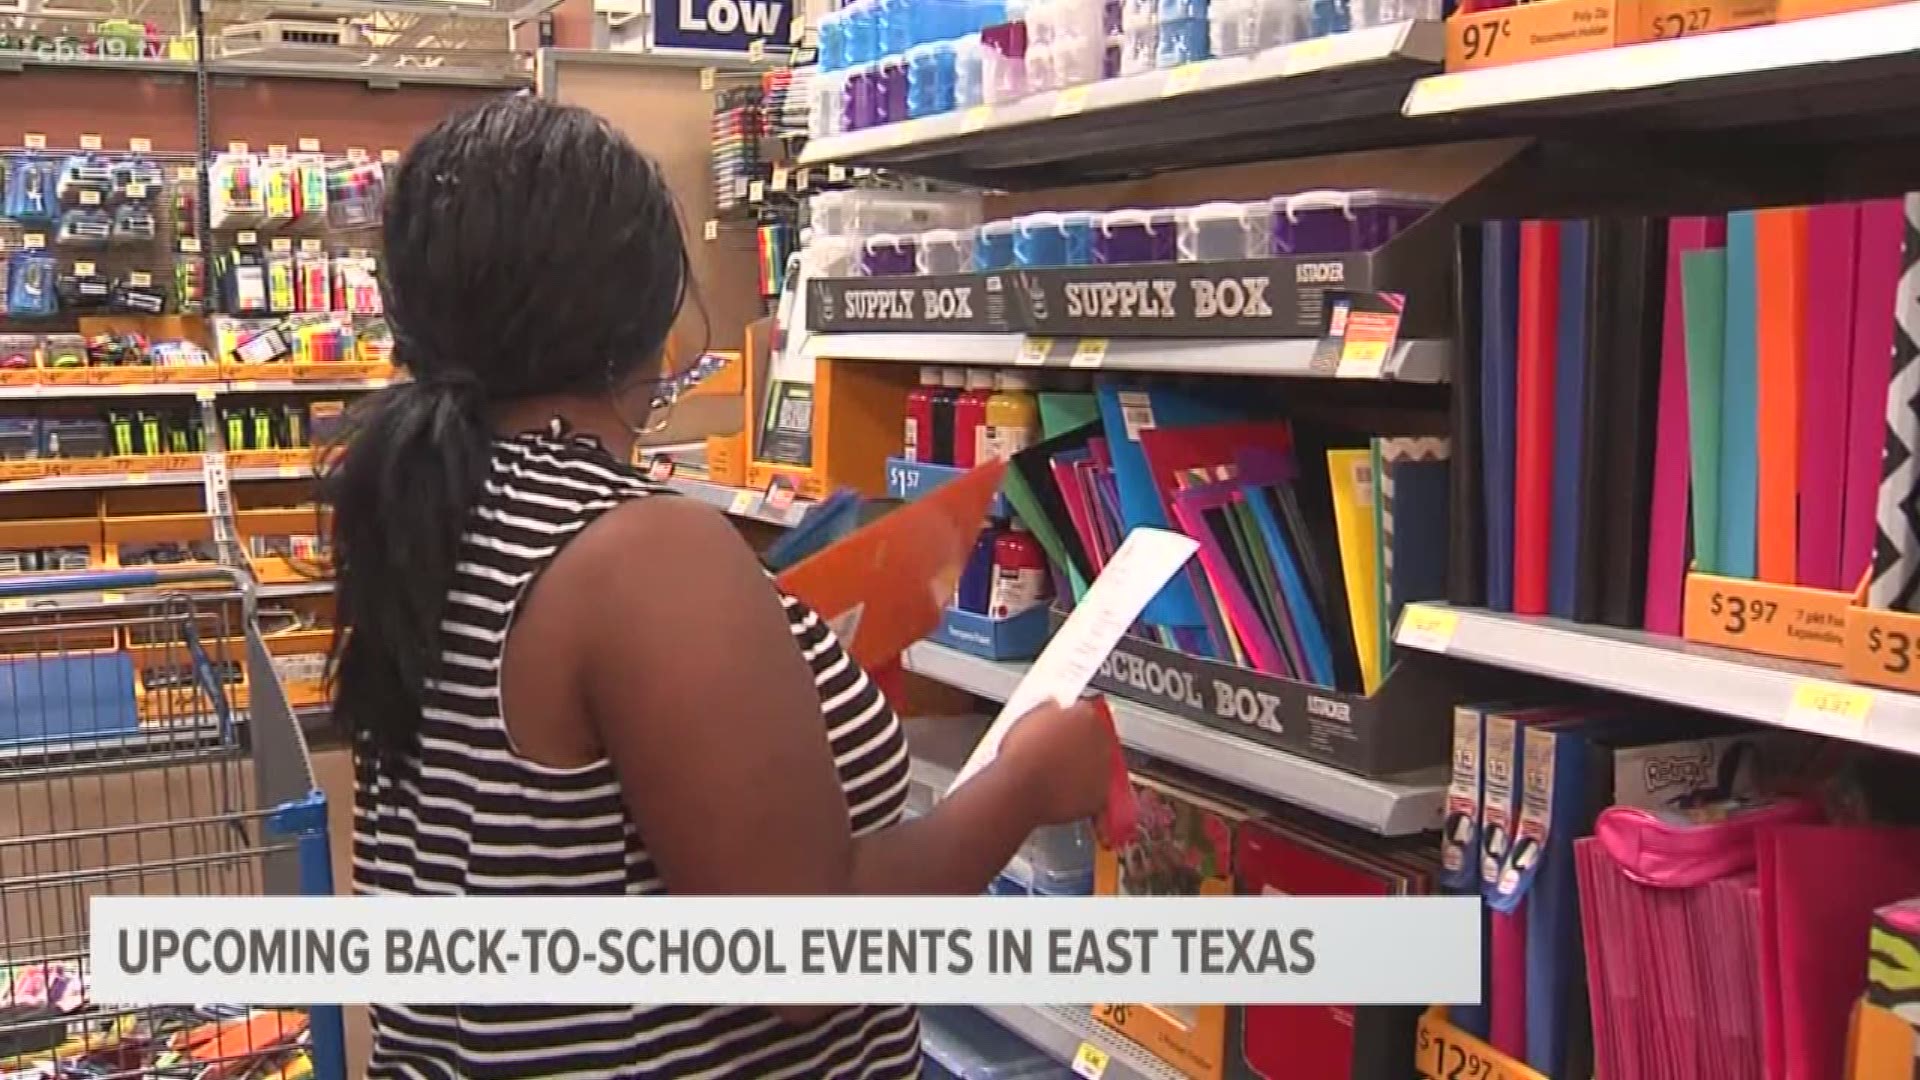 With summer break coming close to an end, back to school events are in full swing. Several local school districts and organizations will be hosting events to help parents and students get supplies for the upcoming 2019-2020 school year.